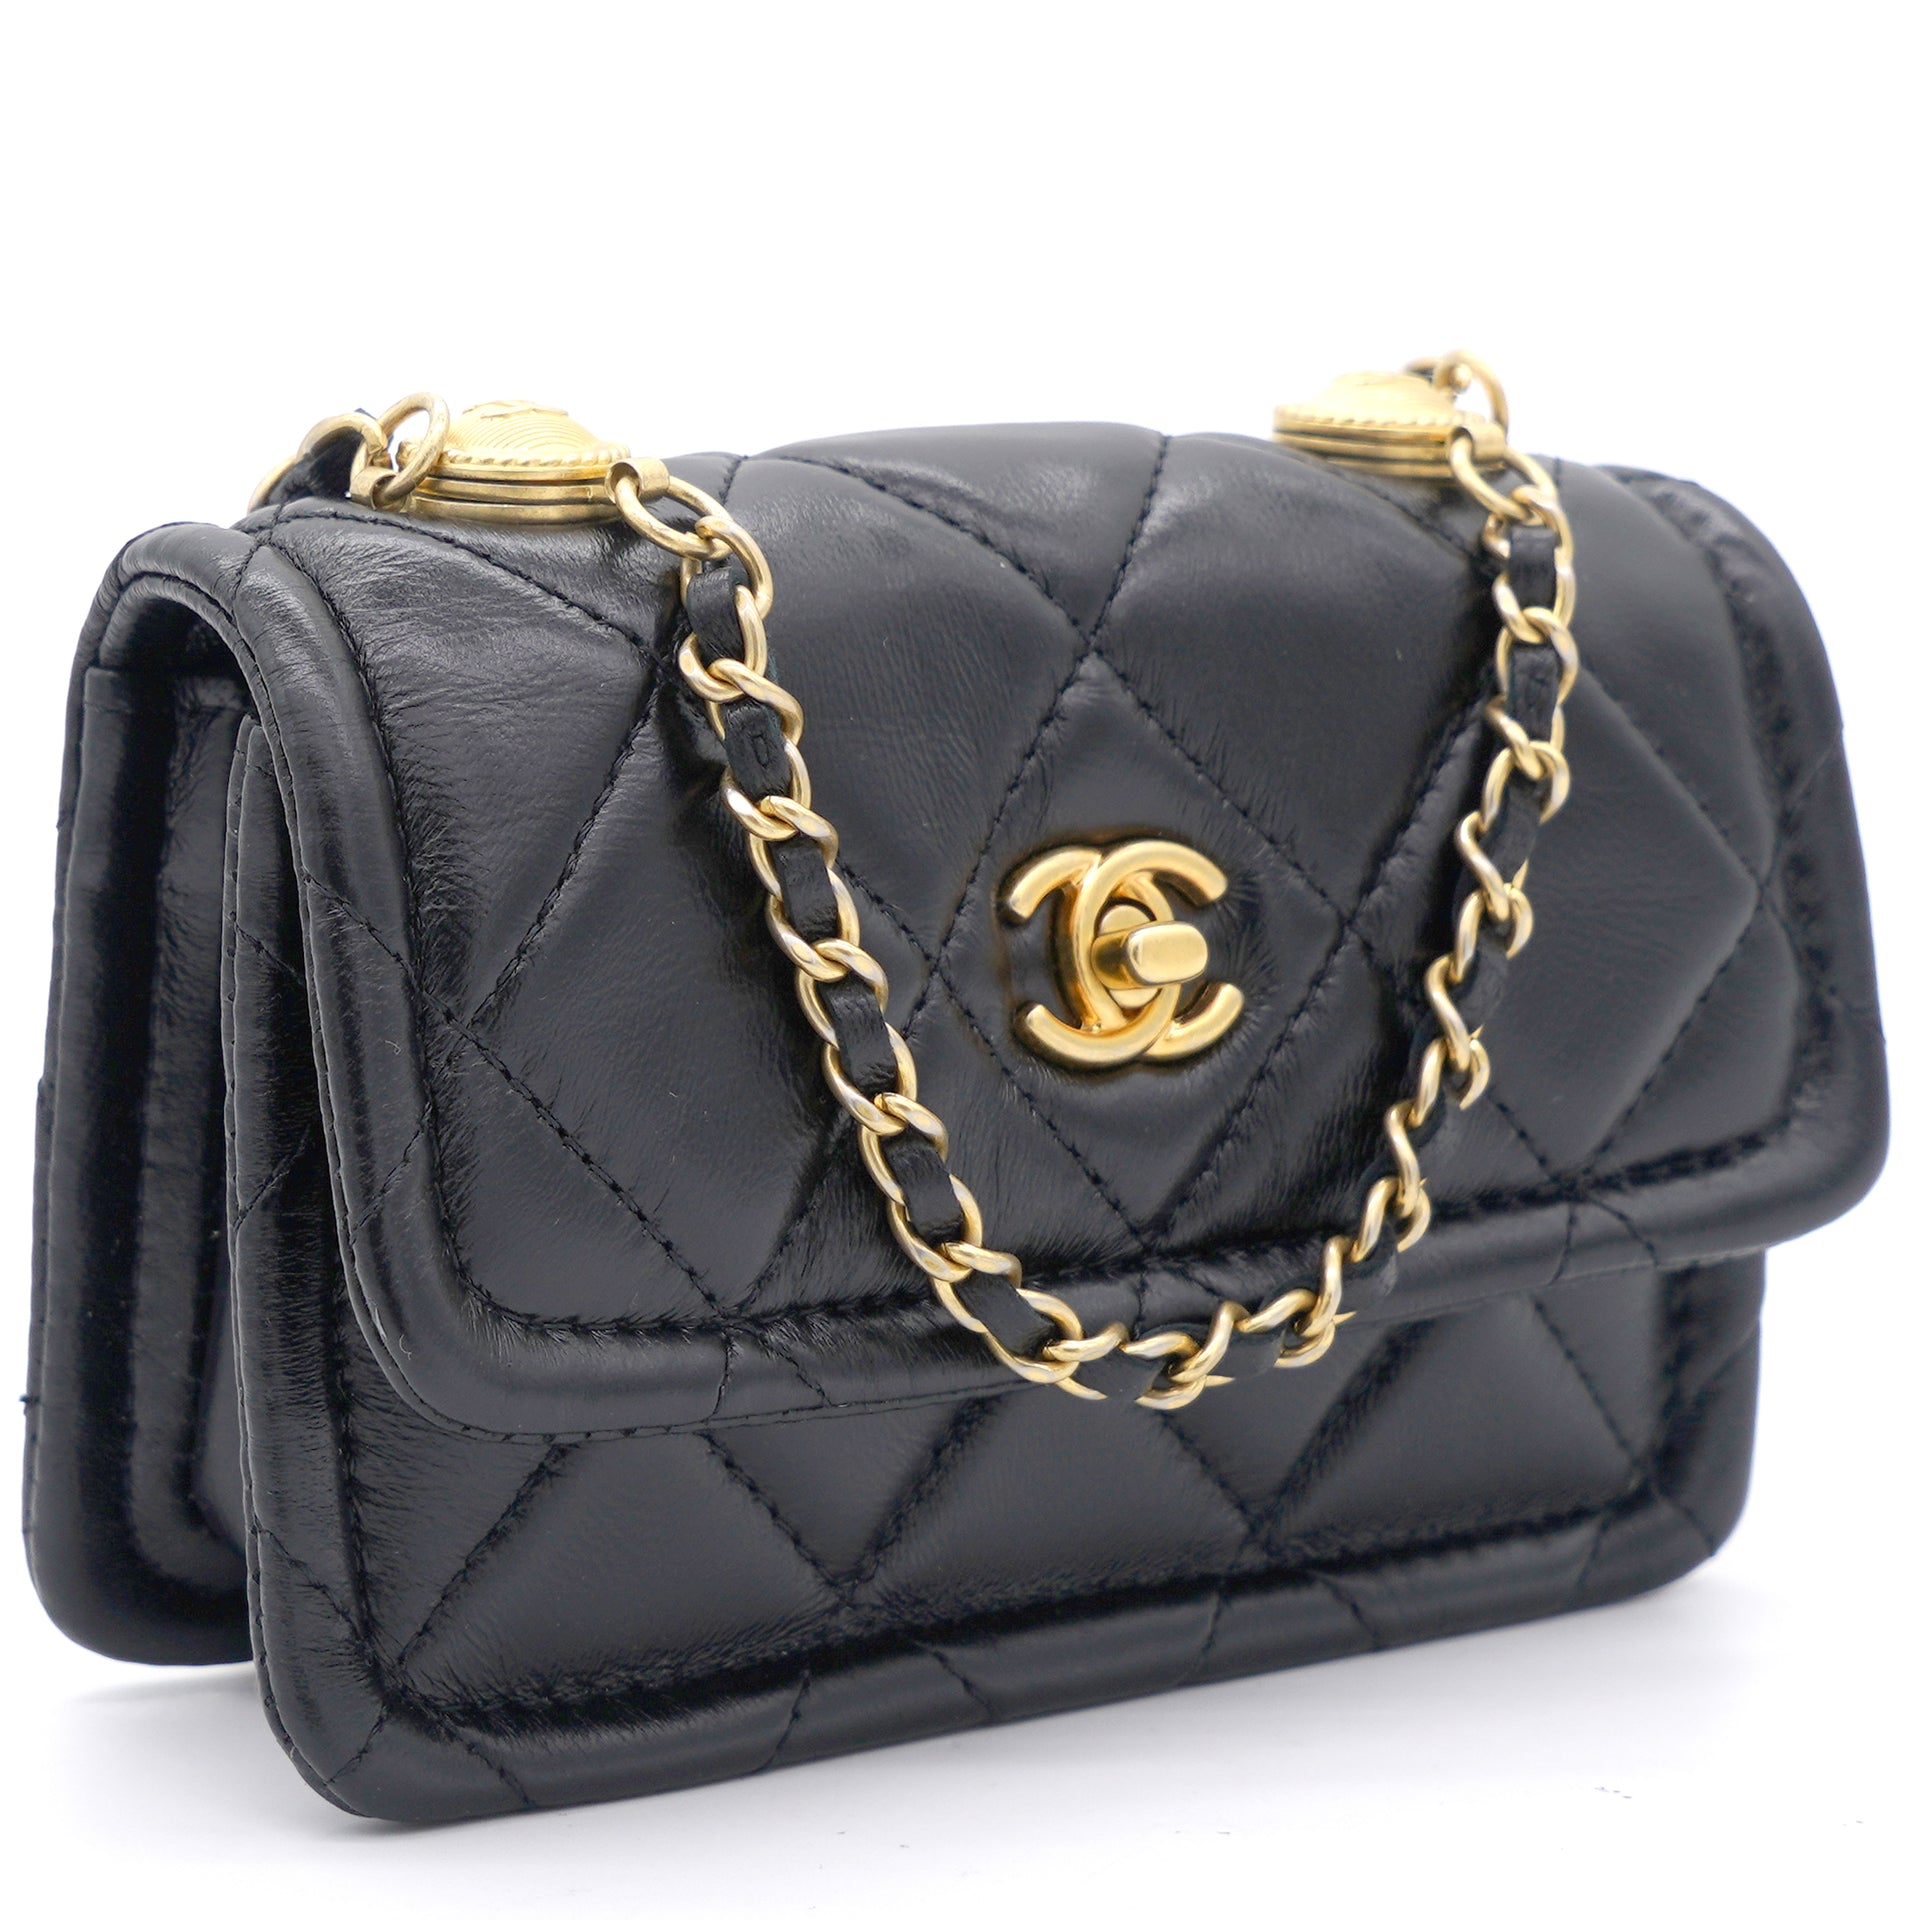 Chanel Lambskin Quilted Nano Flap Bag with button details Black